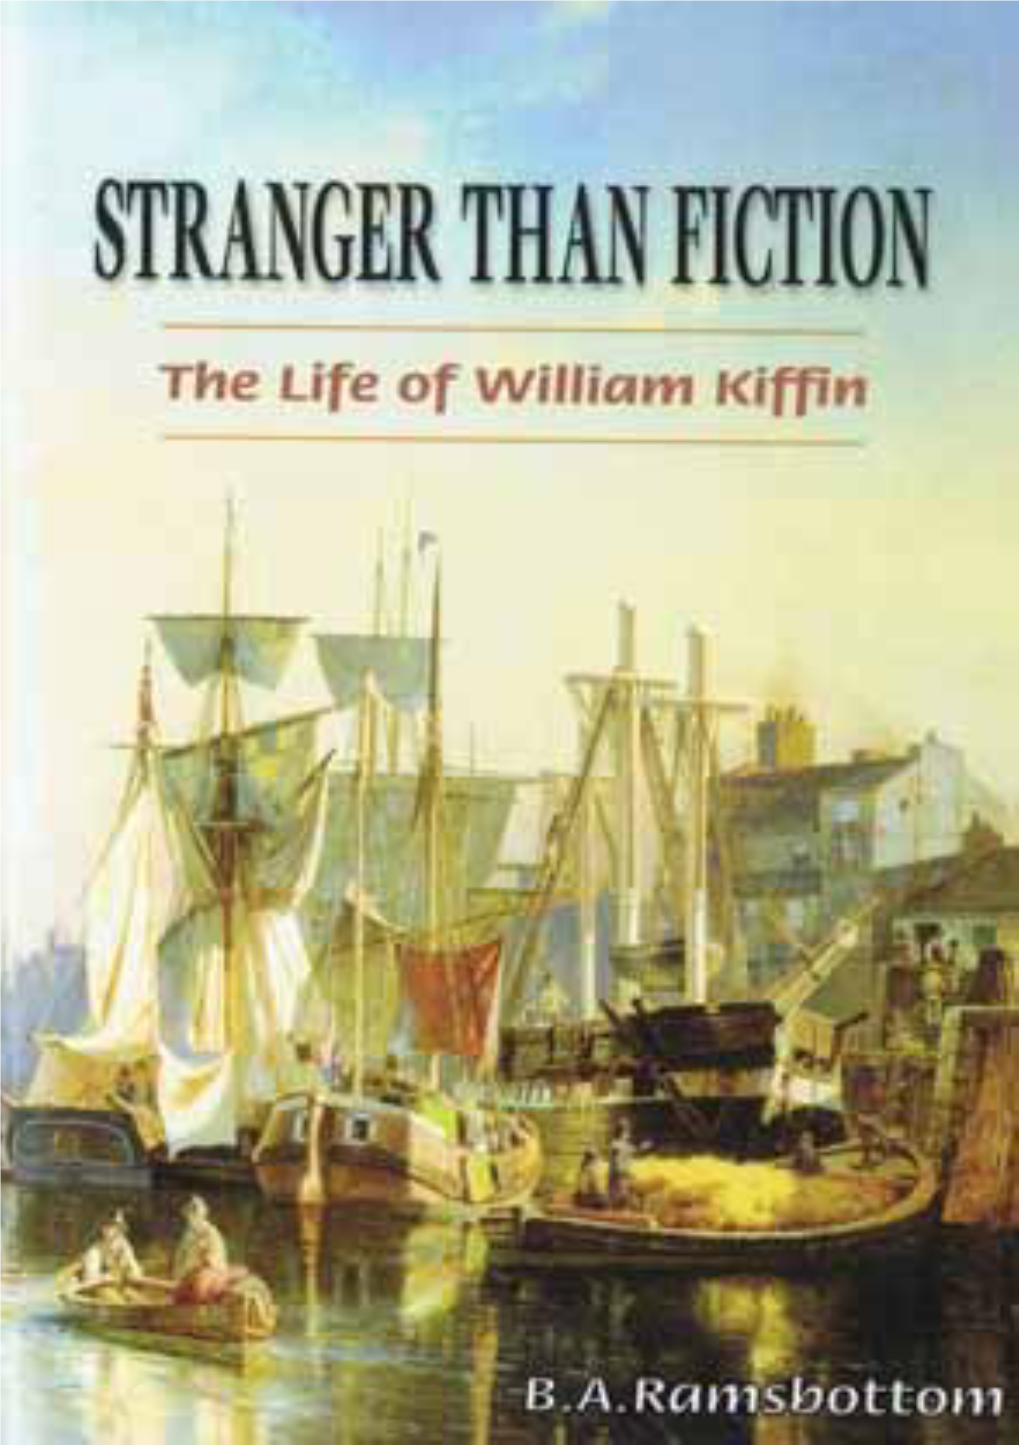 STRANGER THAN FICTION the Life of William Kiffin